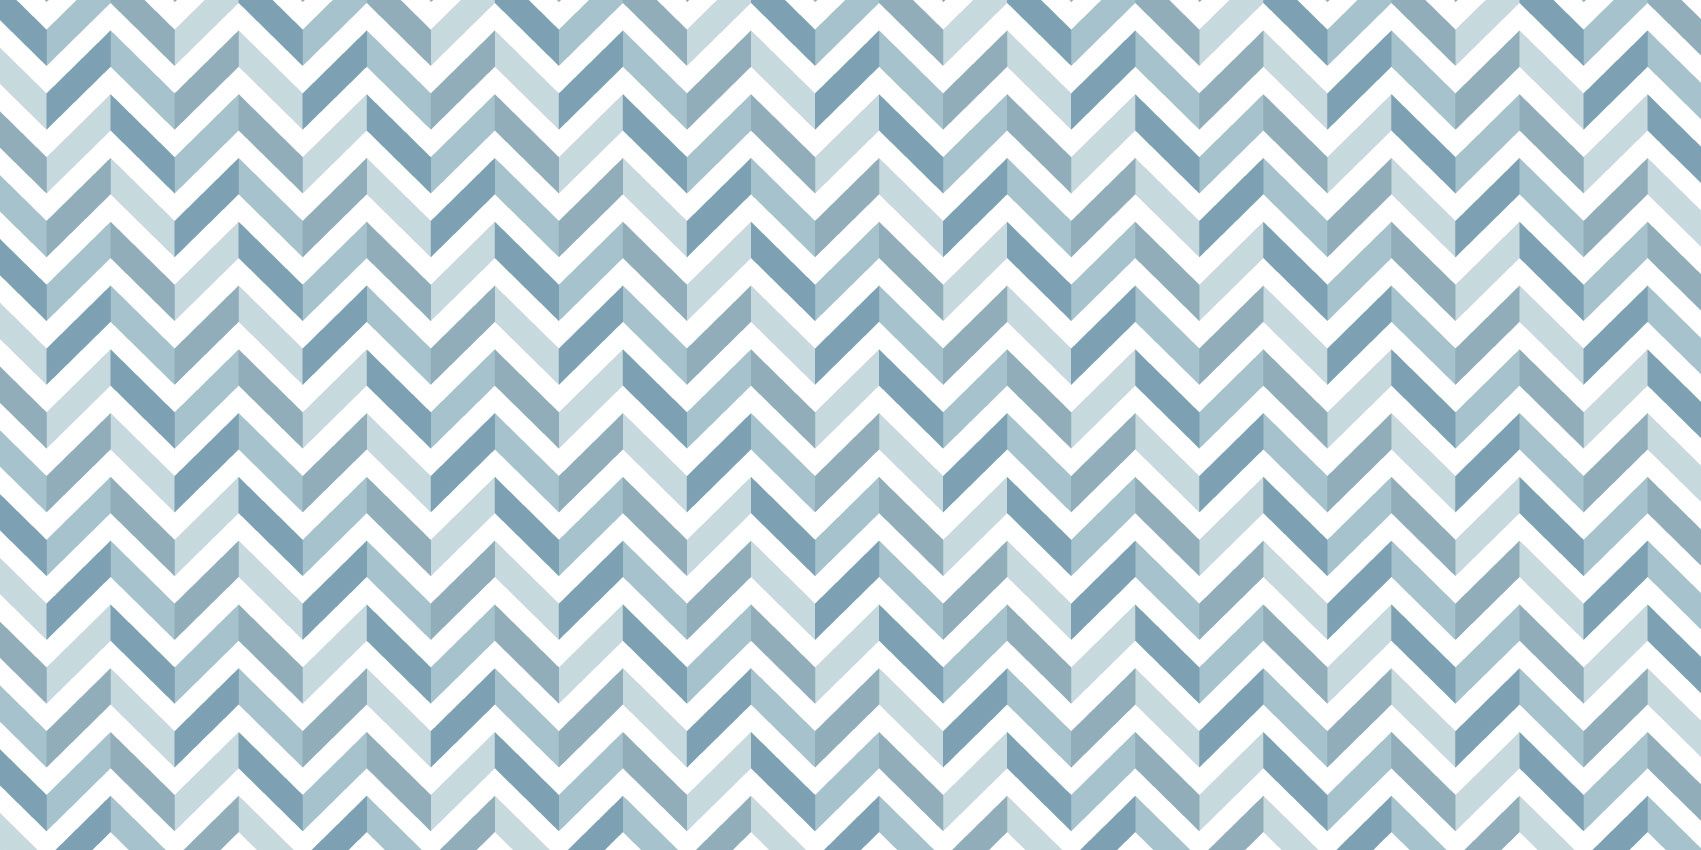 Navy Blue and White Peel and Stick Wallpaper Herringbone for Bathroom  177in X 393in Geometric Vinyl Removable Self Adhesive Wallpaper Line Up  Easily for Home Decoration  Amazoncom